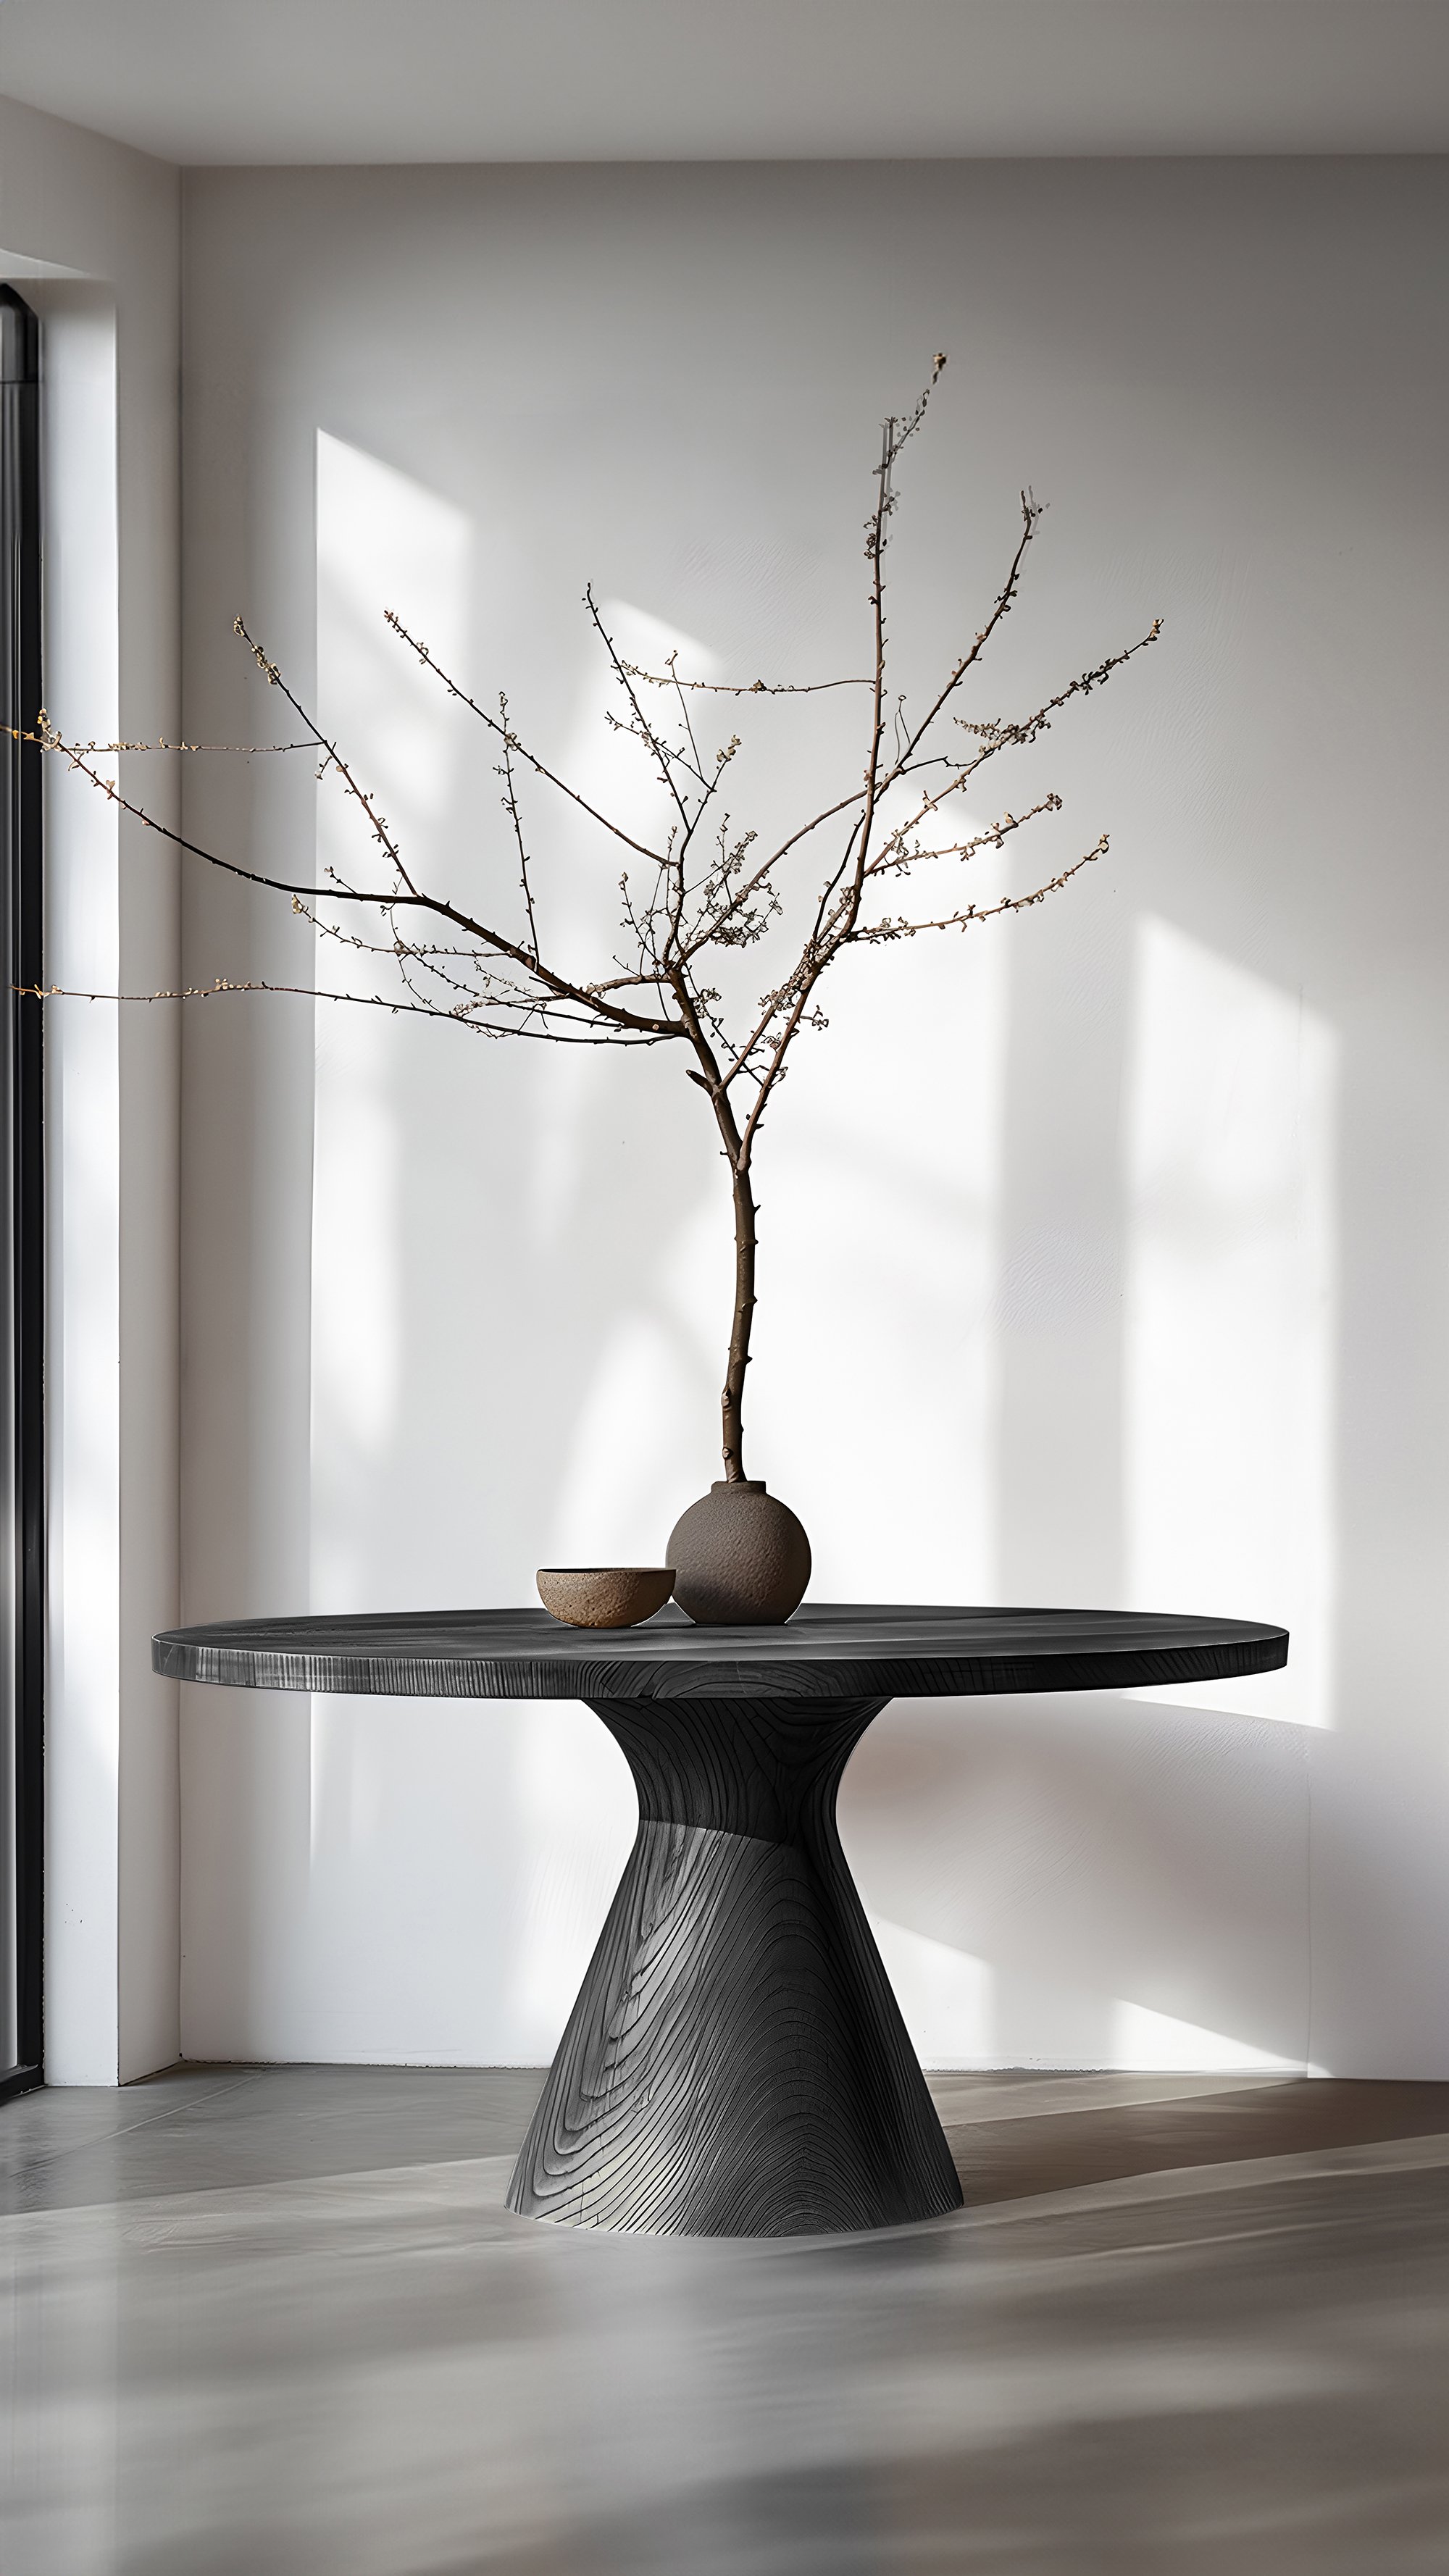 NONO's Socle Series No03, Cocktail Tables with a Black Wooden Twist - 9.jpg